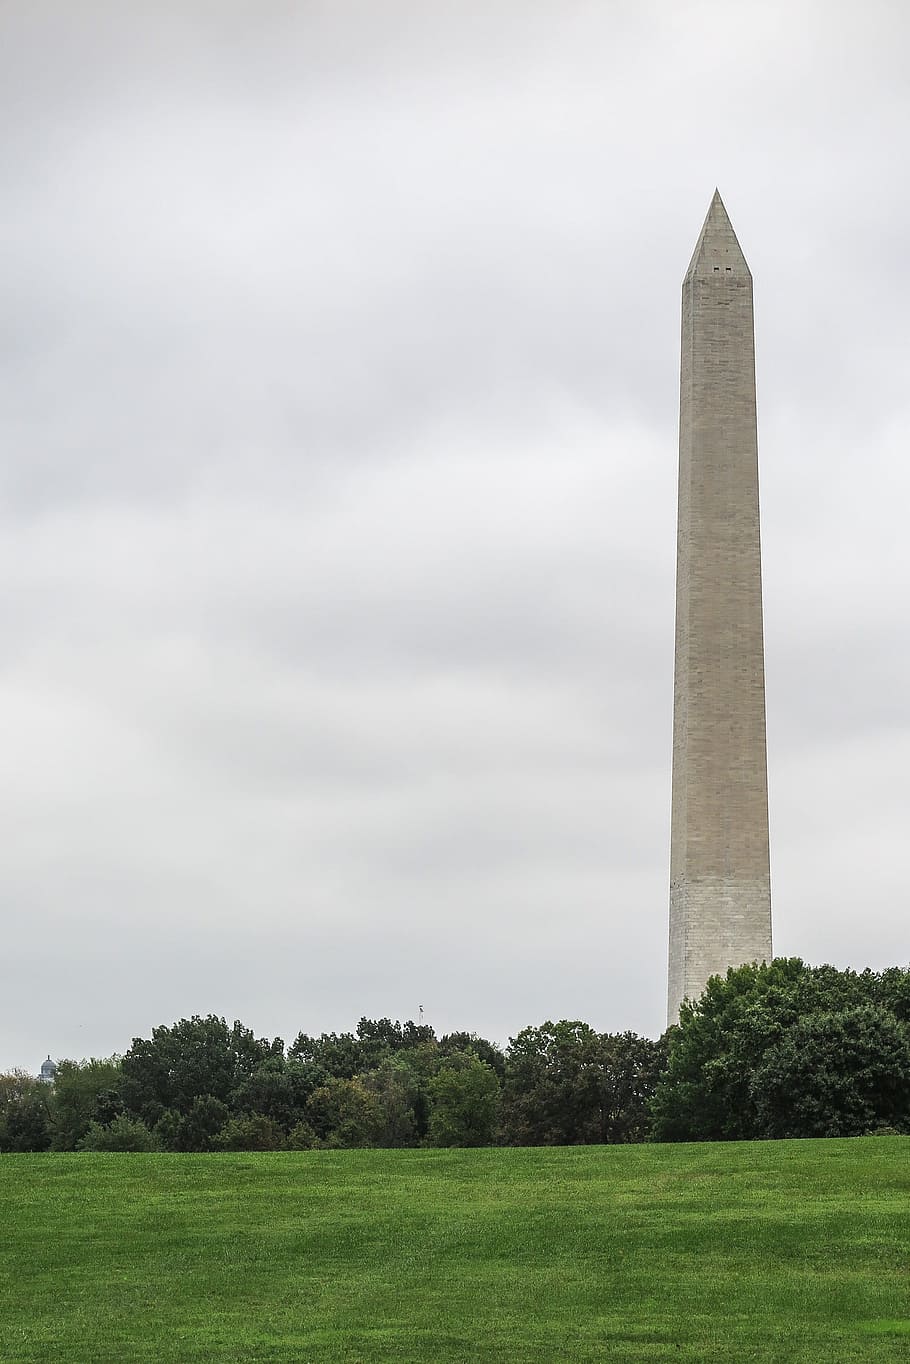 washinton dc mall view, washinton monument, rising, behind, grass hill, hill., america, american, architectural, architecture